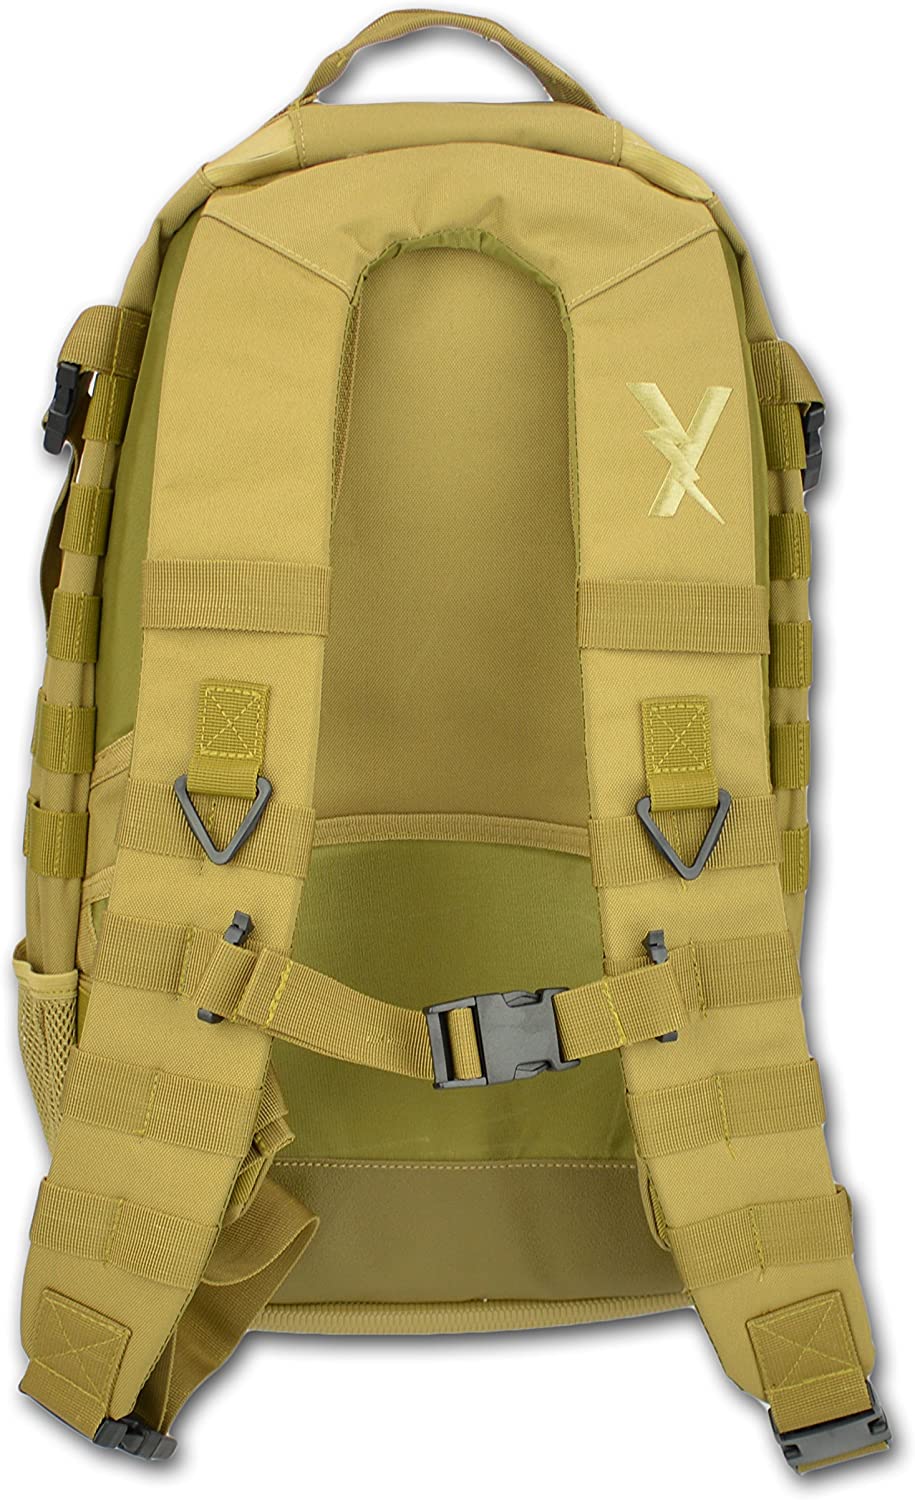 Lightning X Premium Tactical Medic Backpack w/ Modular Pouches & Hydration Port - image 3 of 8